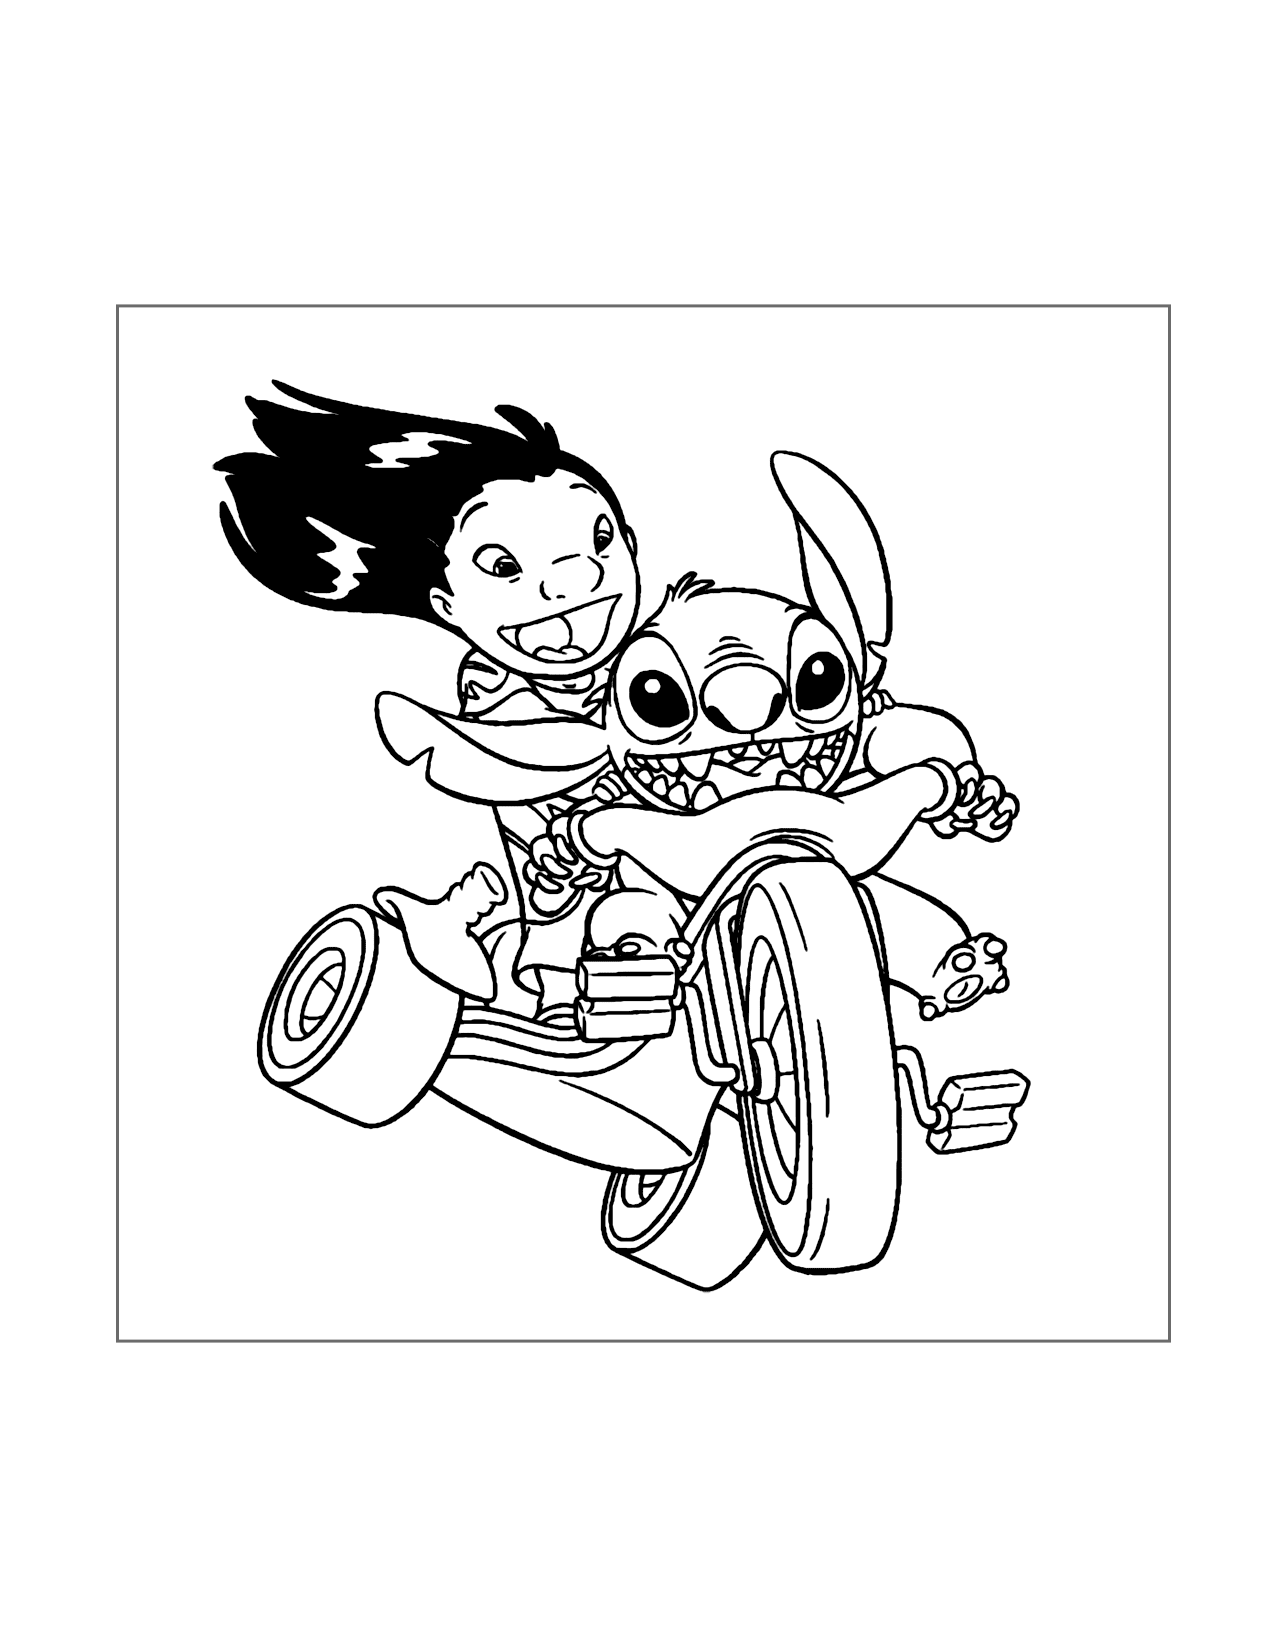 Lilo And Stitch Riding Big Wheel Coloring Page